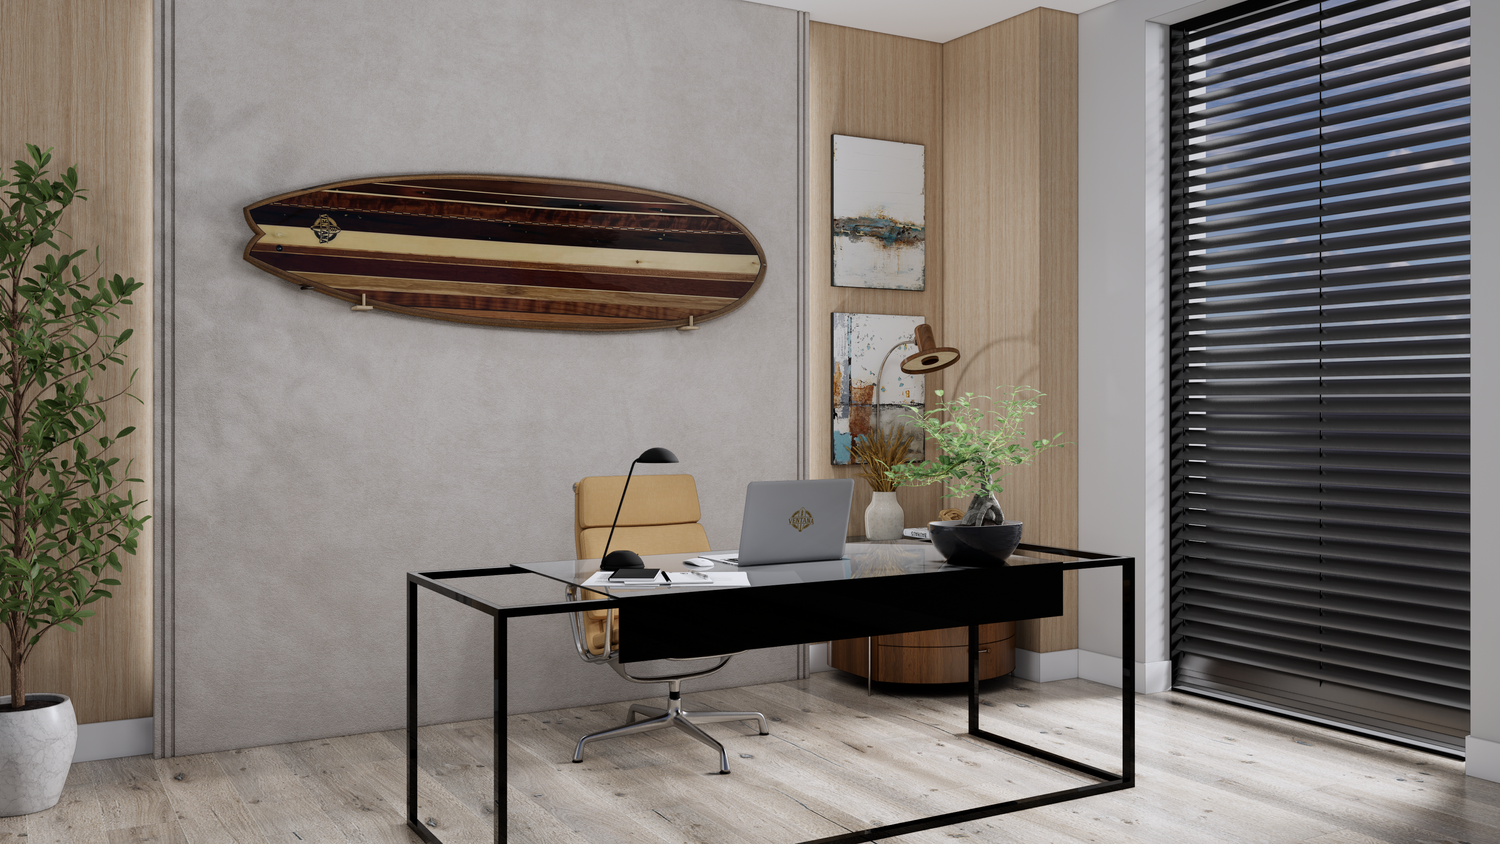 Ventana Surfboard in a Home Office